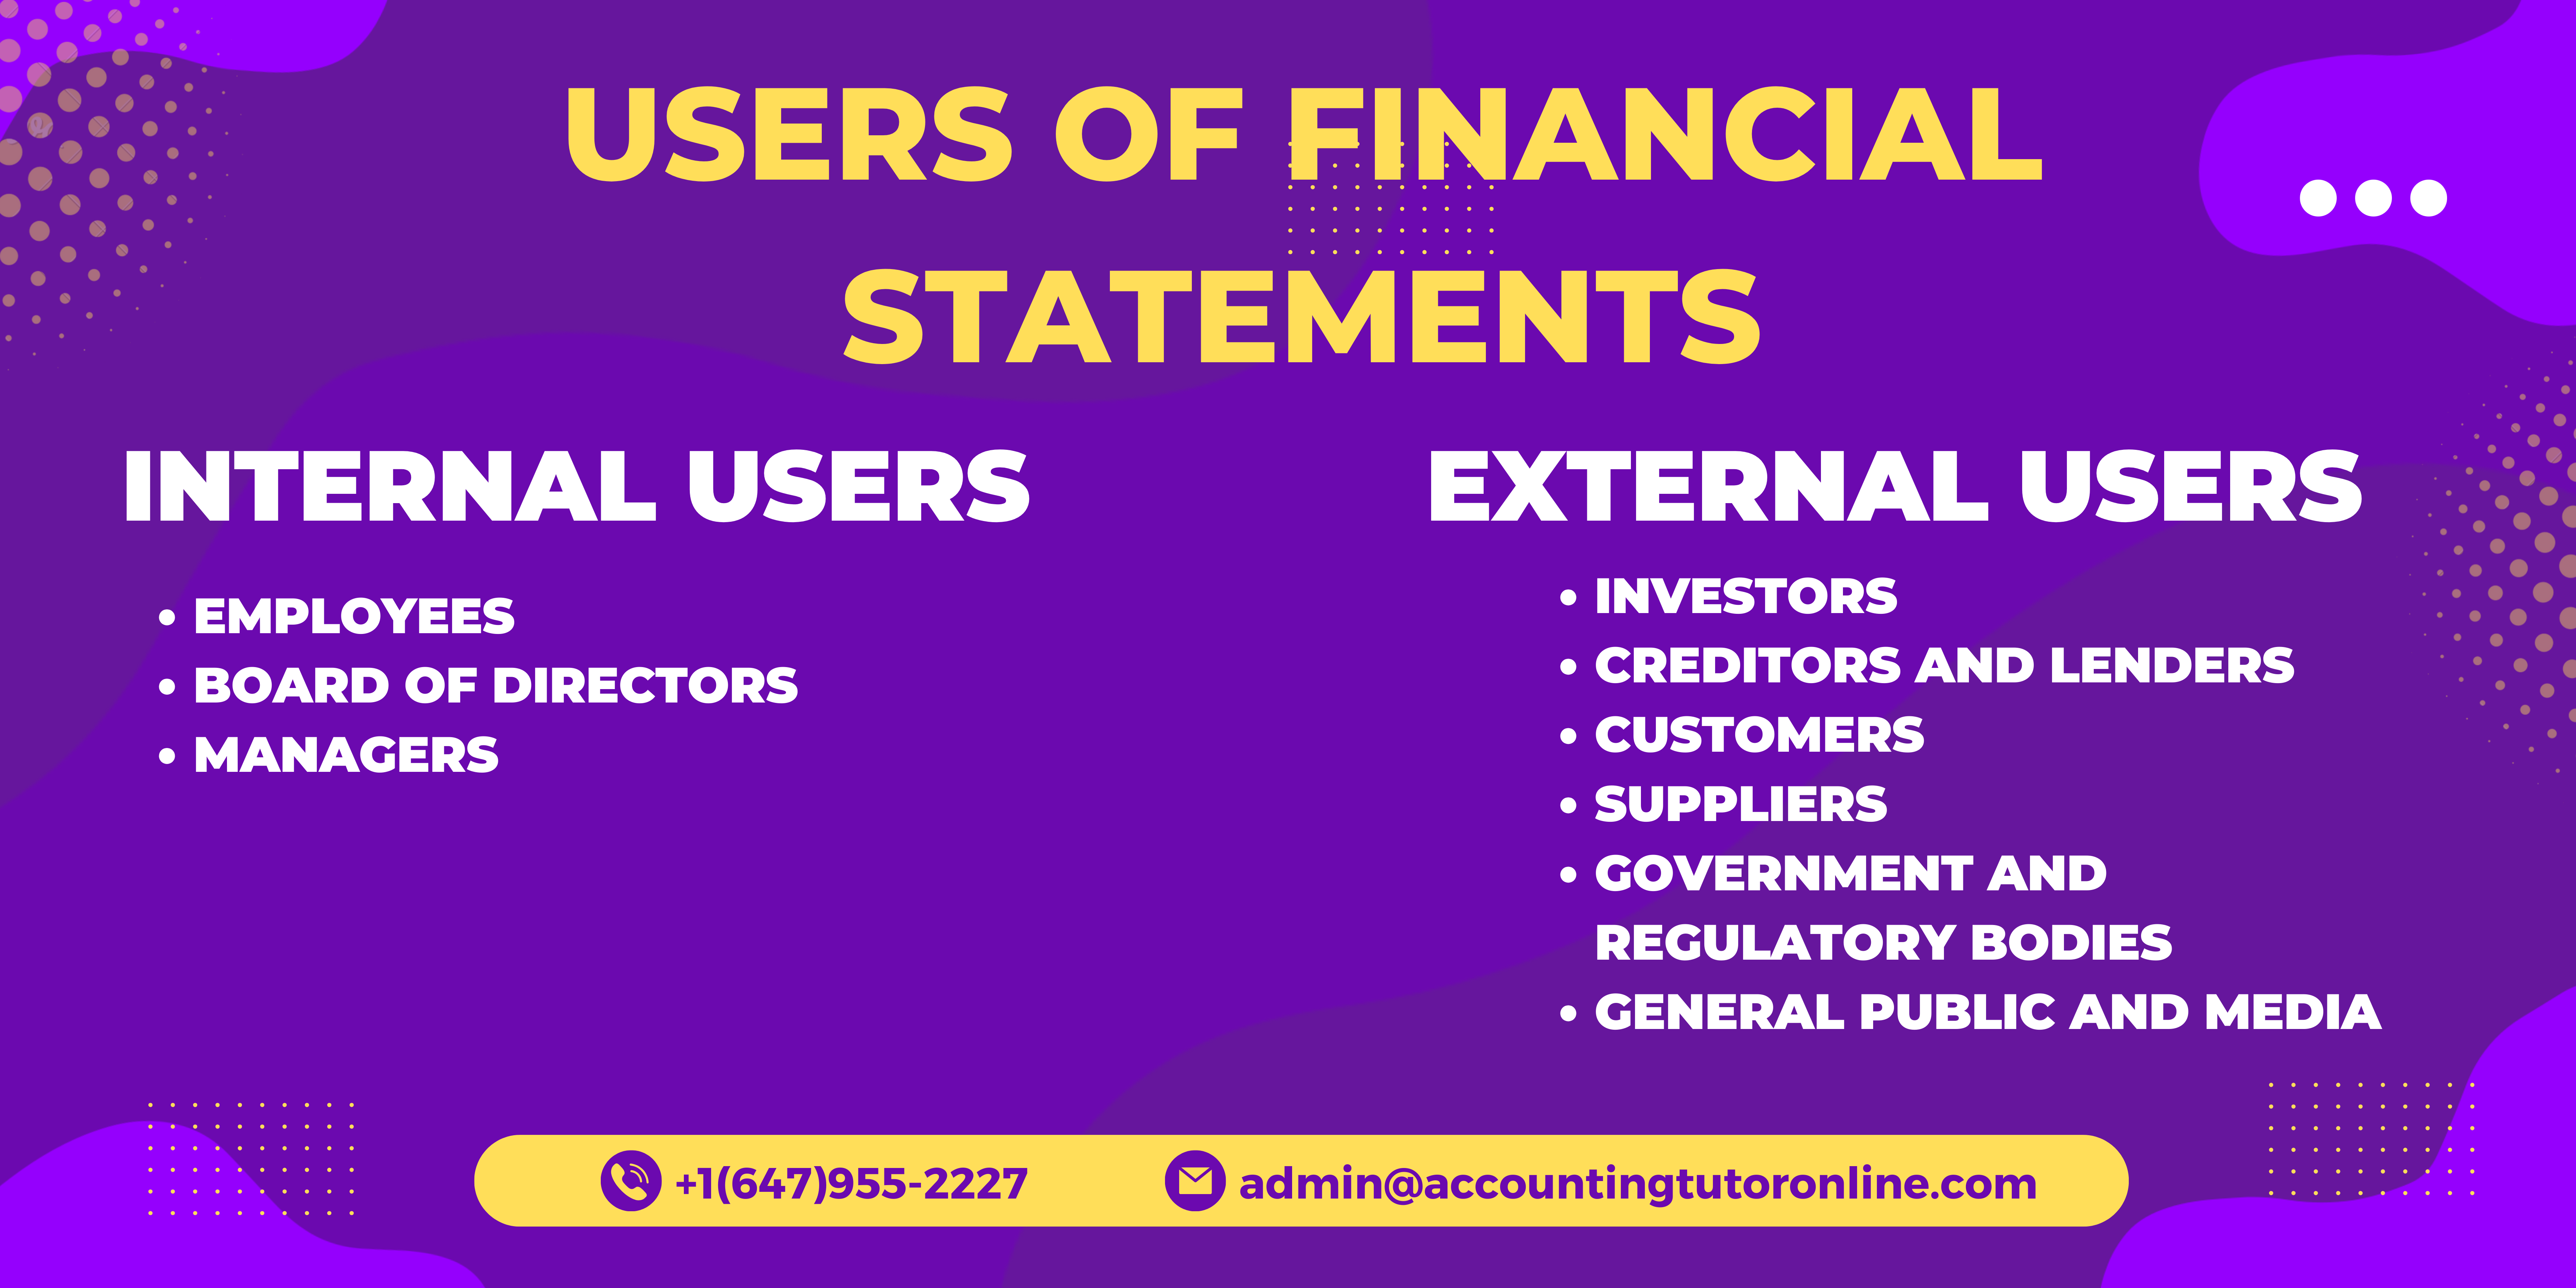 Internal and external users of financial statements